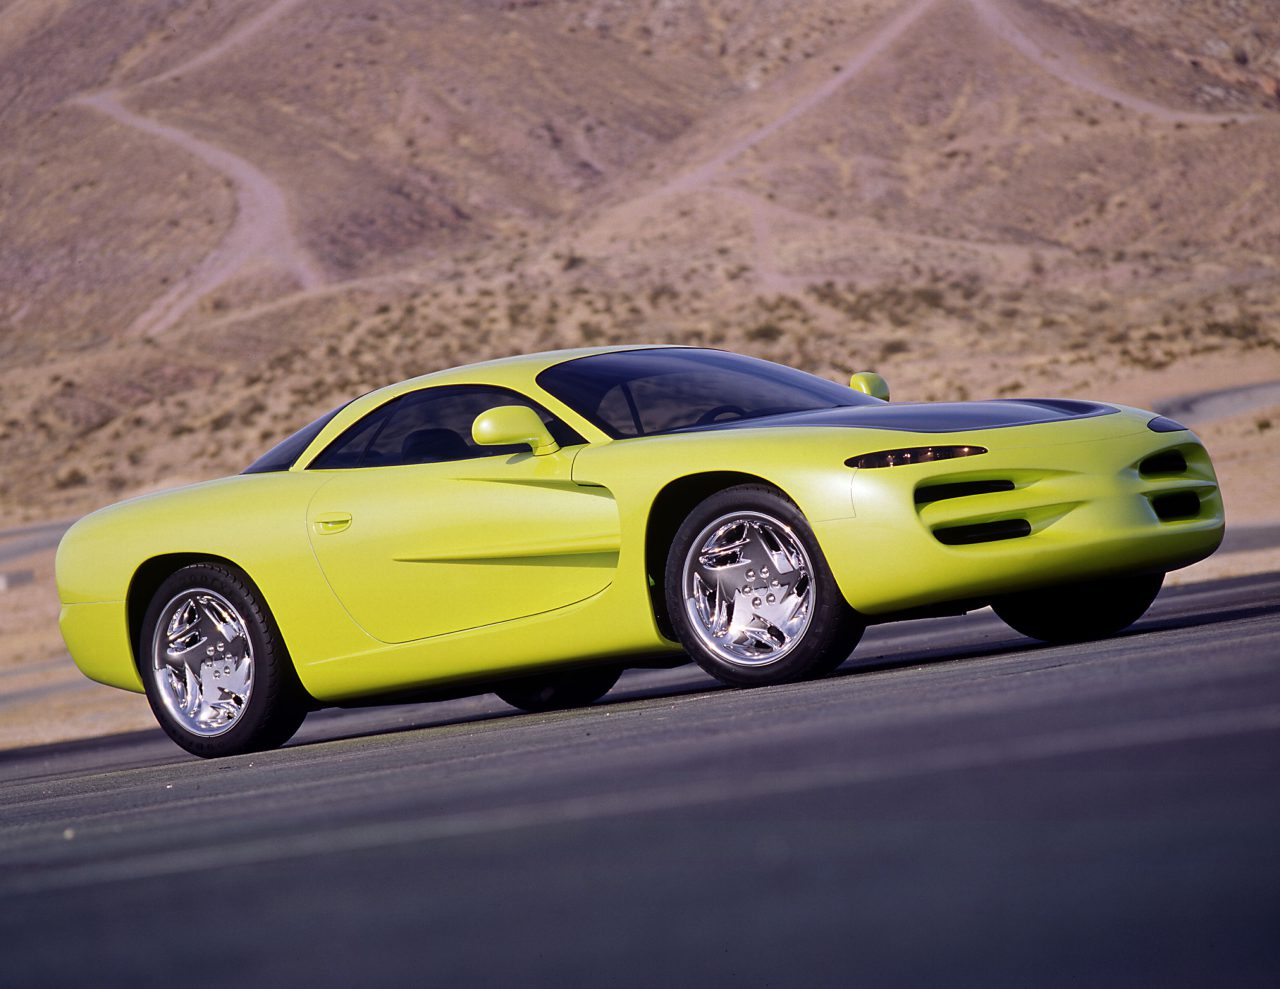 Dodge Concept Vehicles, Photo Gallery: 1980s and 1990s Dodge concept vehicles, ClassicCars.com Journal